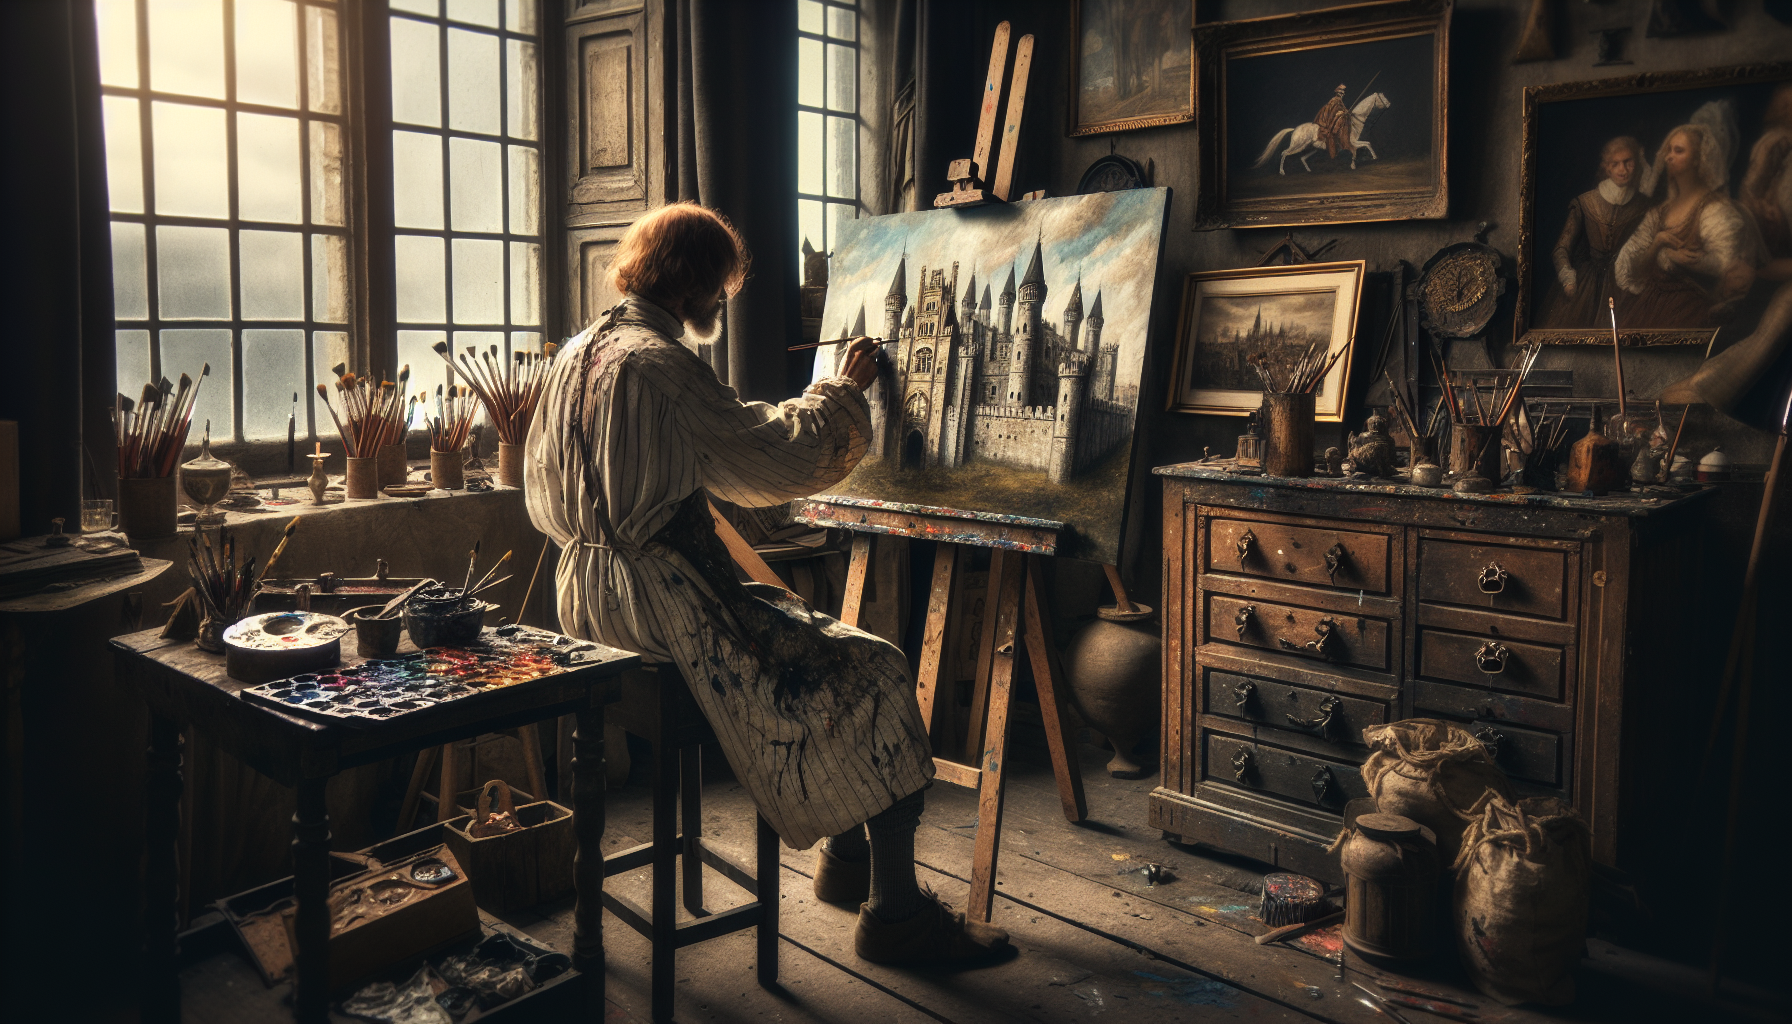 An artist painting a scene from a historical fiction novel